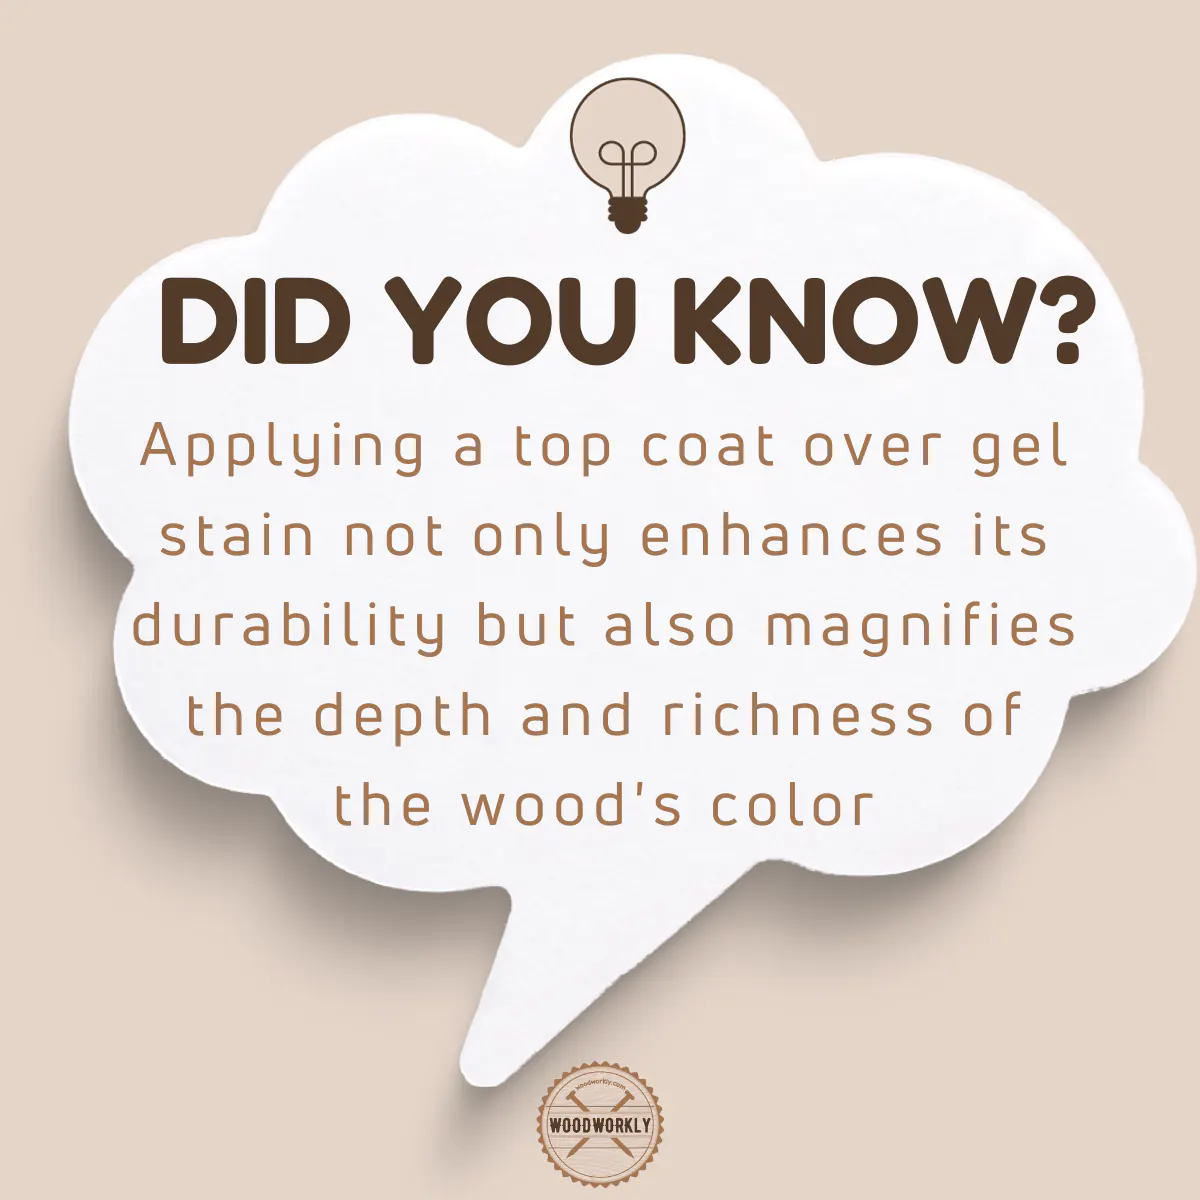 Did you know fact using a top coat over gel stain